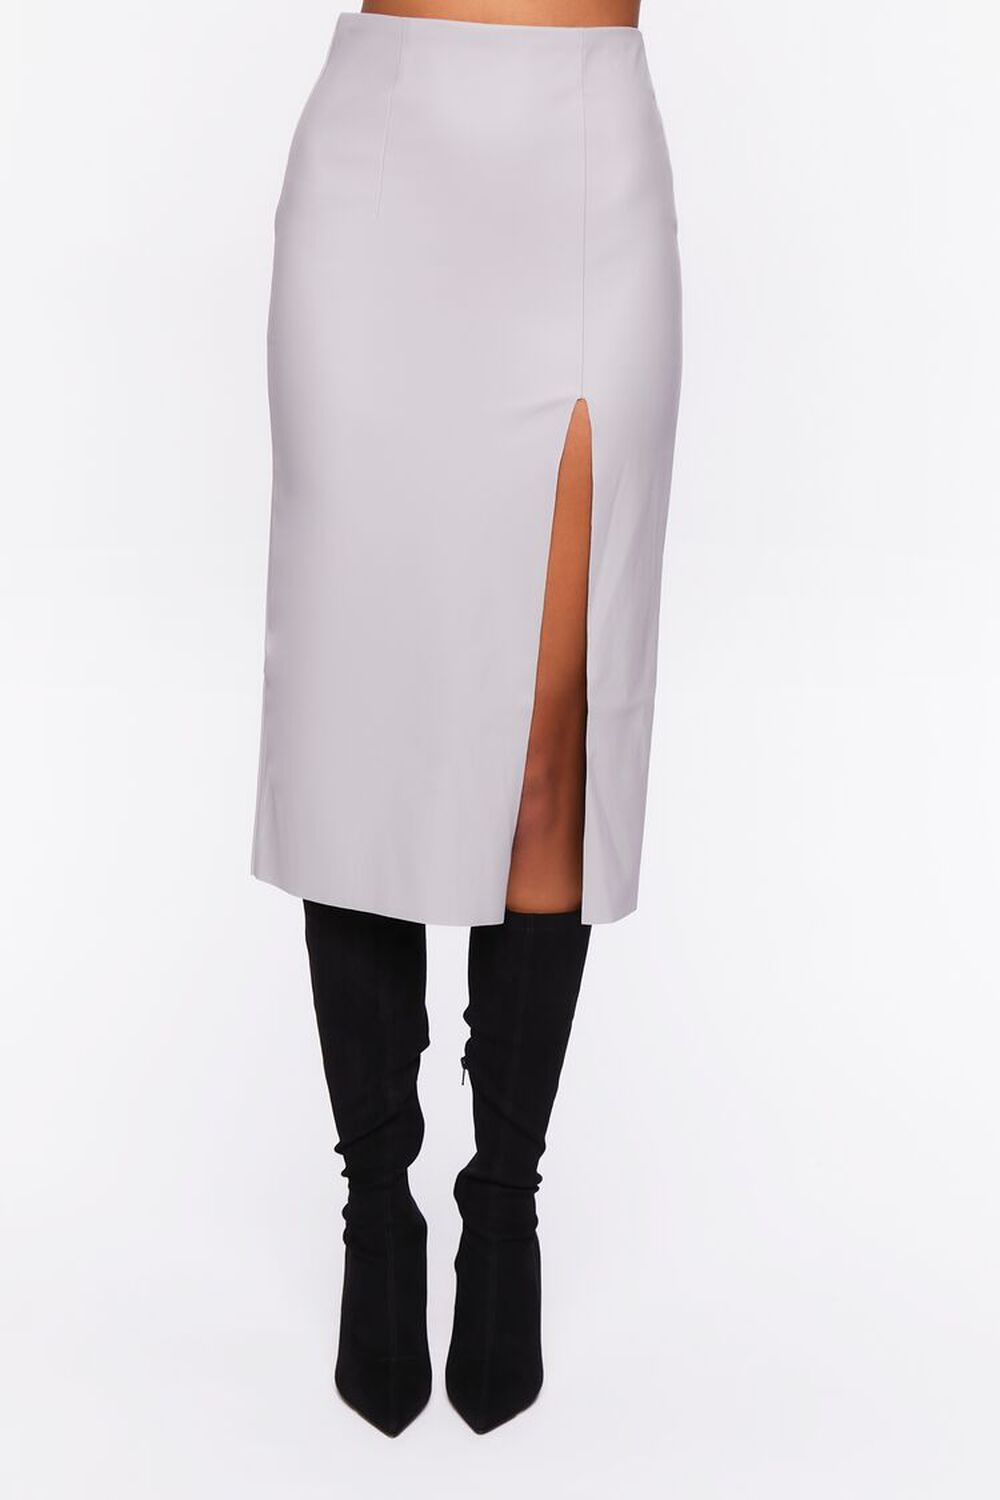 SILVER Faux Leather Thigh-Slit Midi Skirt, image 2